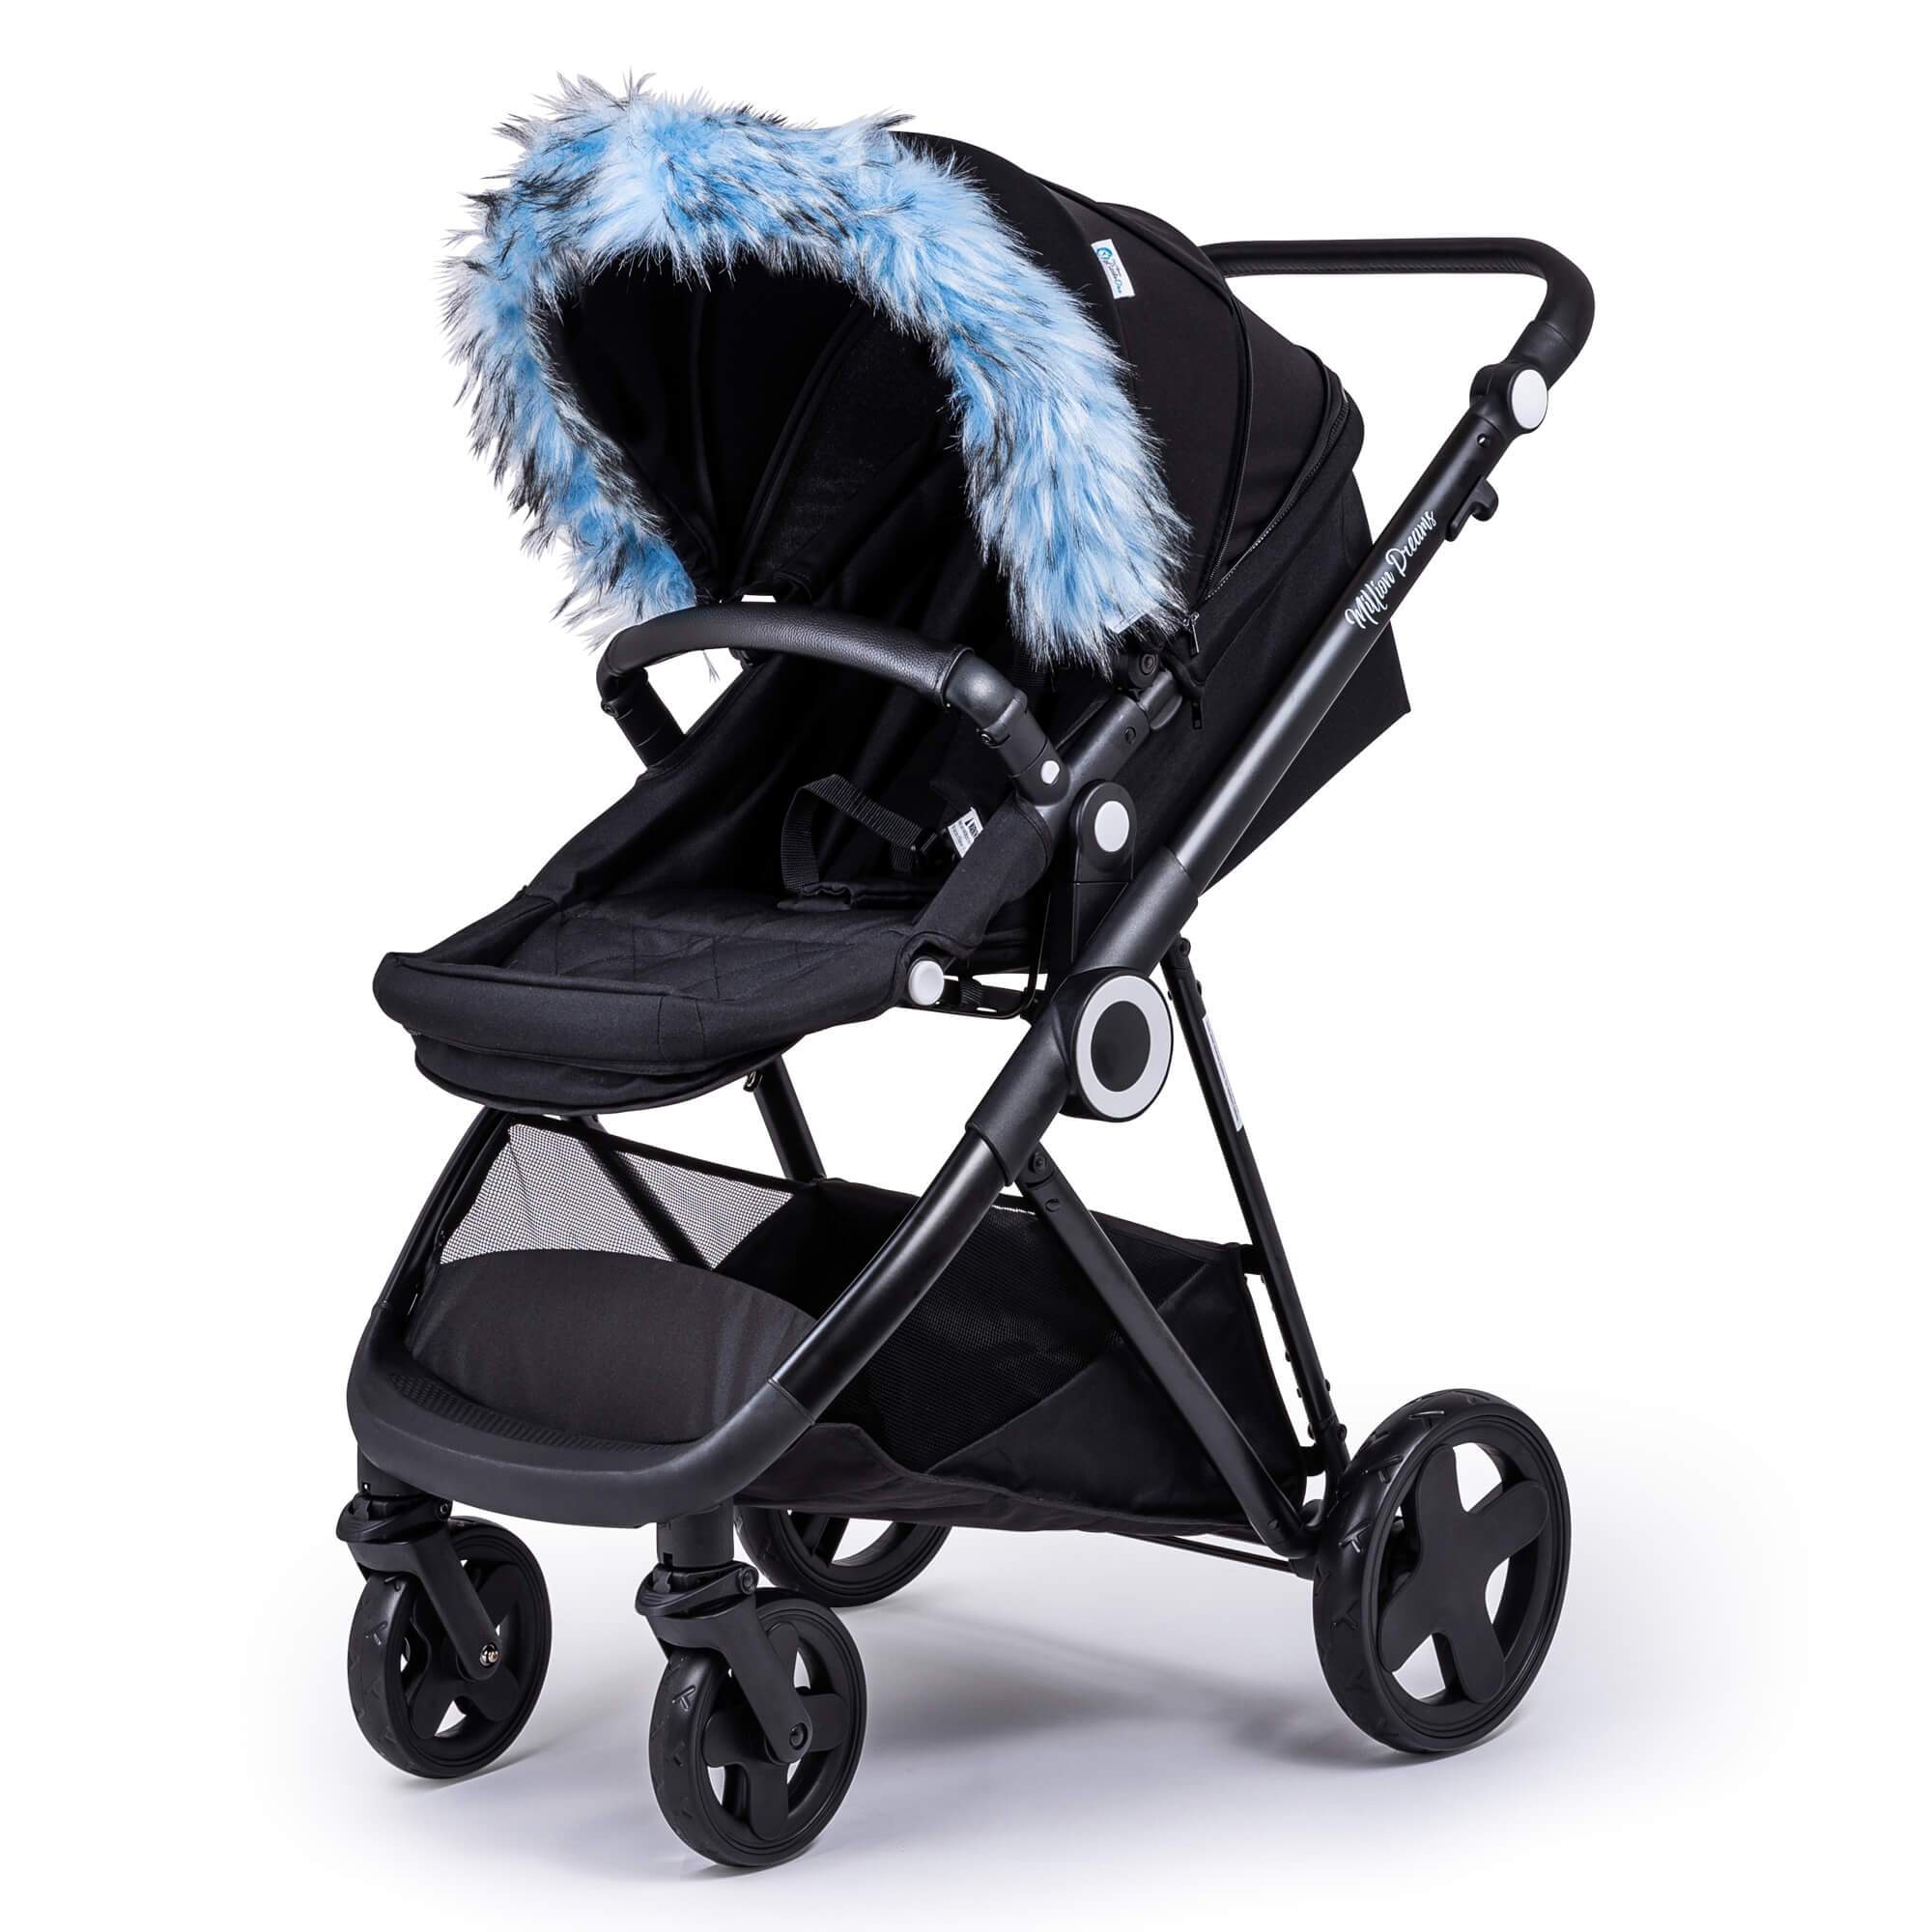 Pram Fur Hood Trim Attachment for Pushchair Compatible with Petite - Light Blue / Fits All Models | For Your Little One